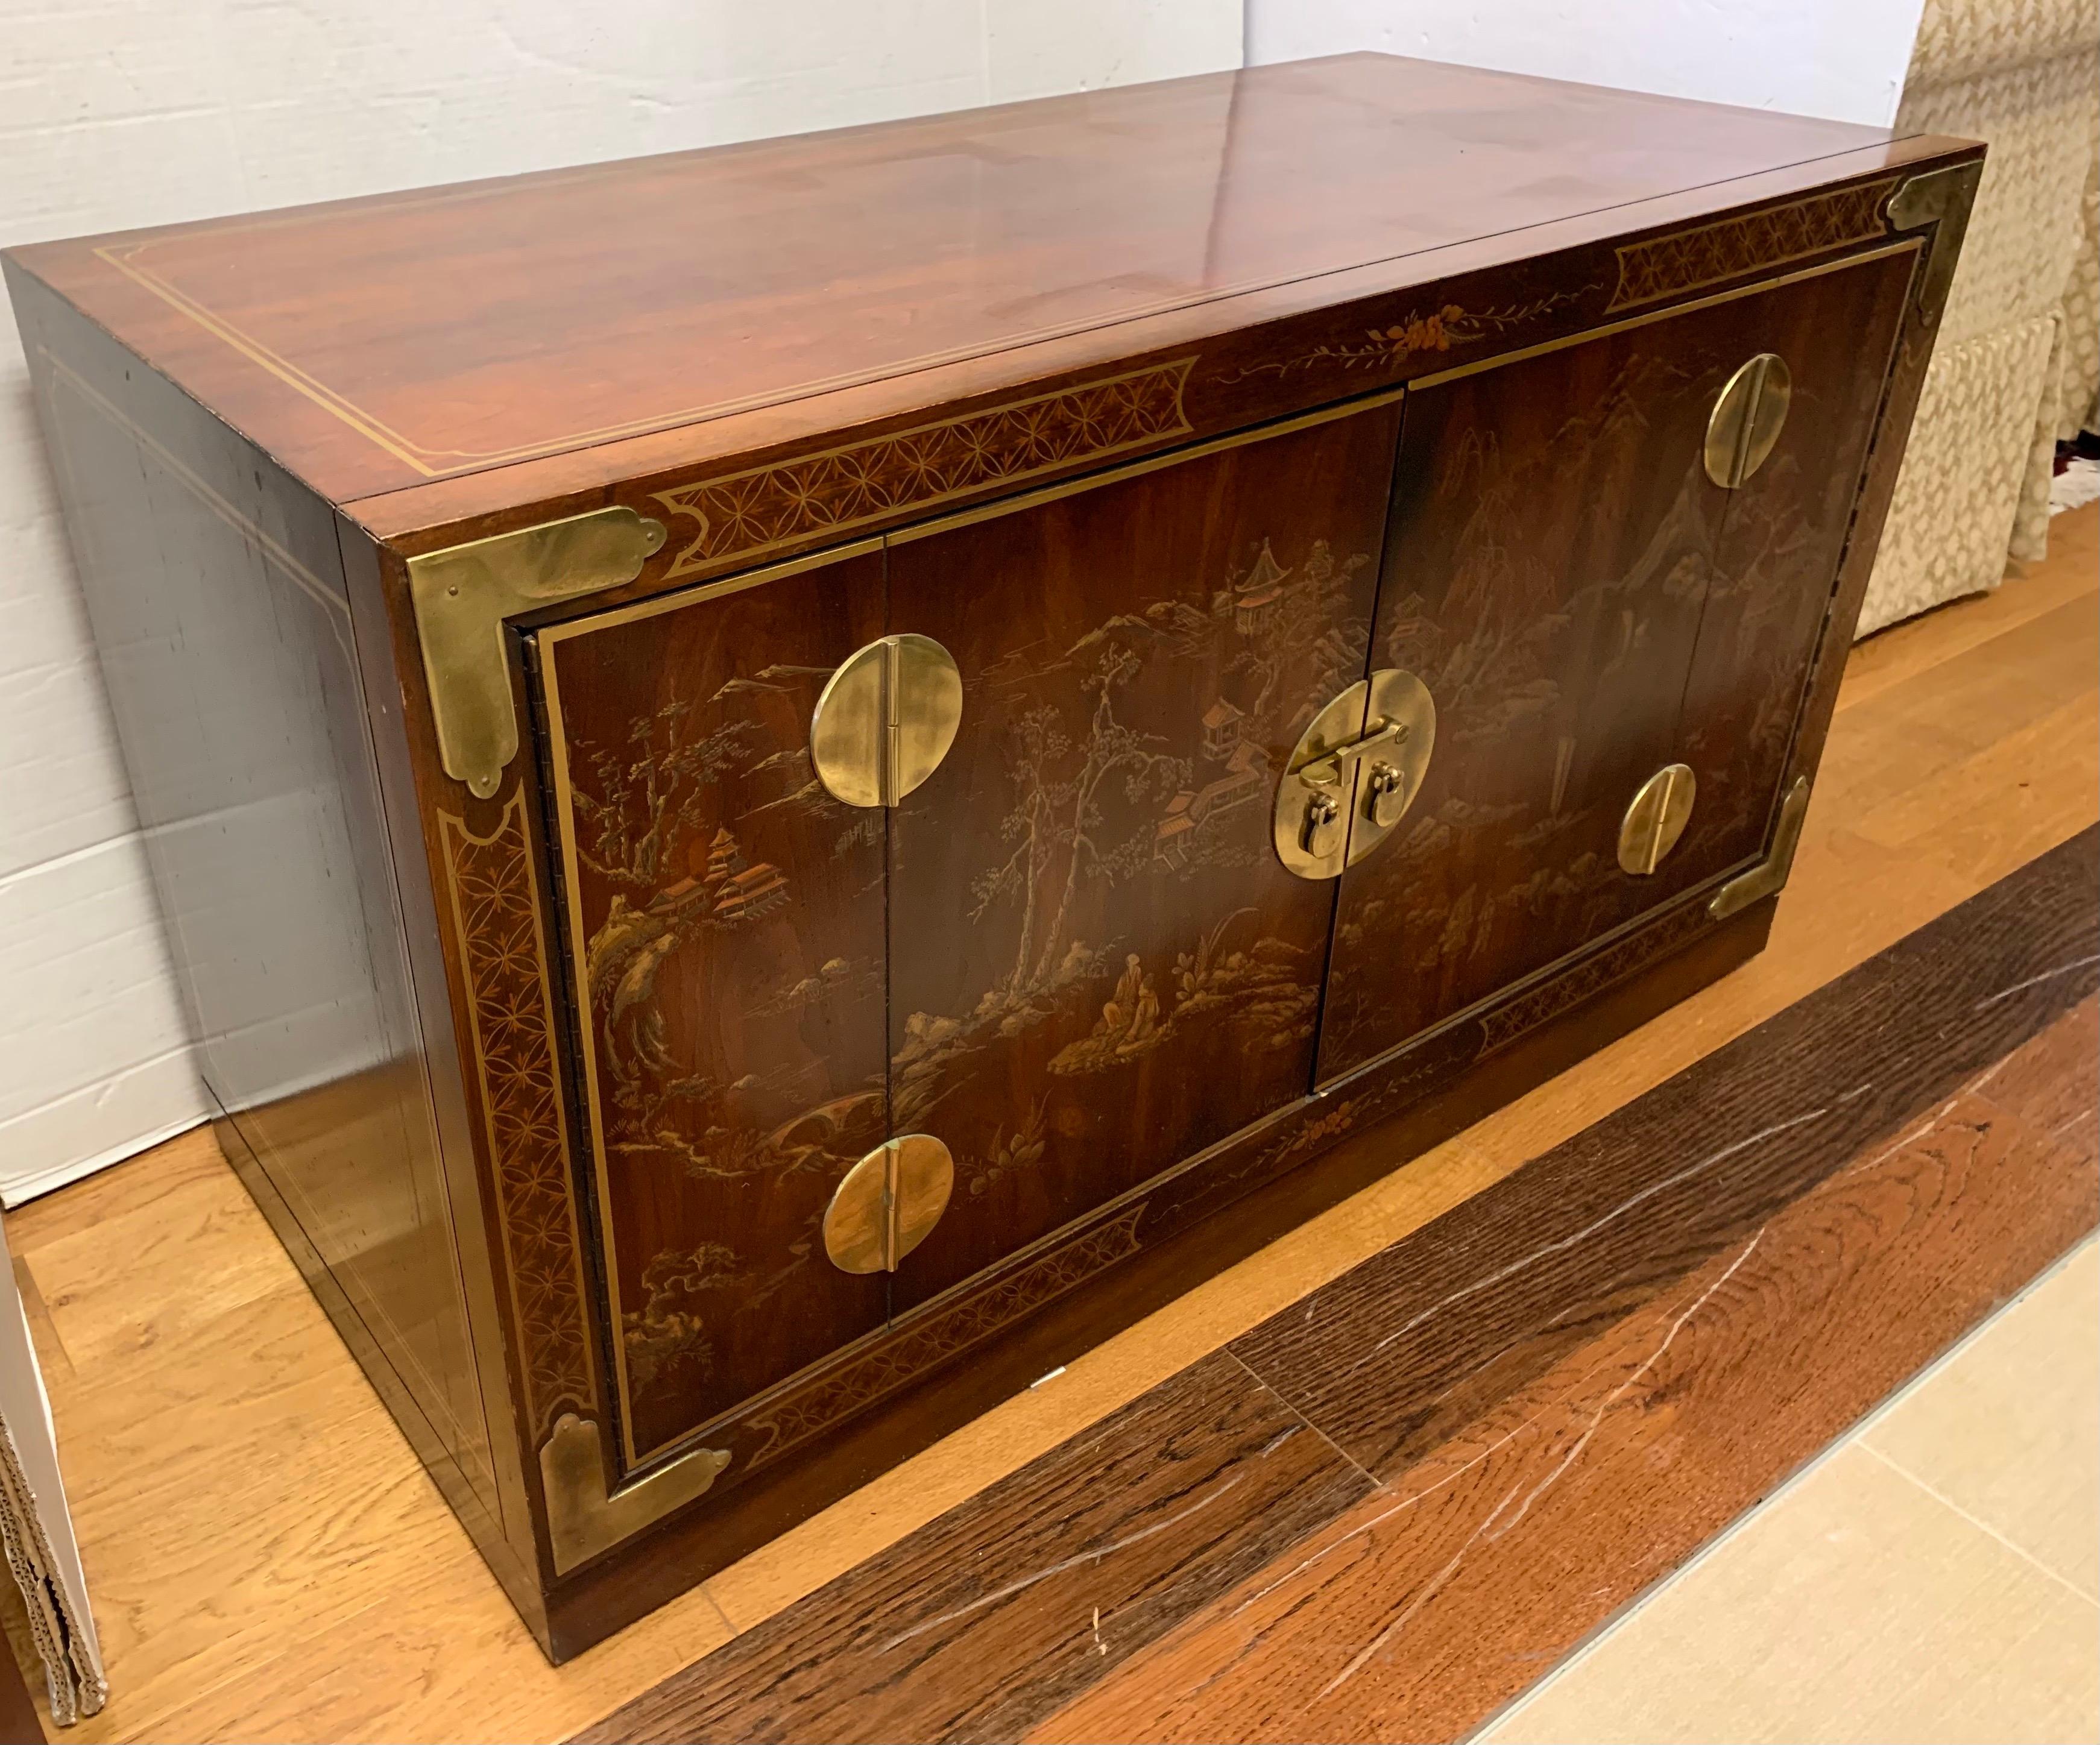 Multi-purpose chinoiserie low cabinet which can be used as a media cabinet, bar, buffet, or in your foyer for storage. It's good to have choices. It features brass hardware and hand painted scenery on the front doors.